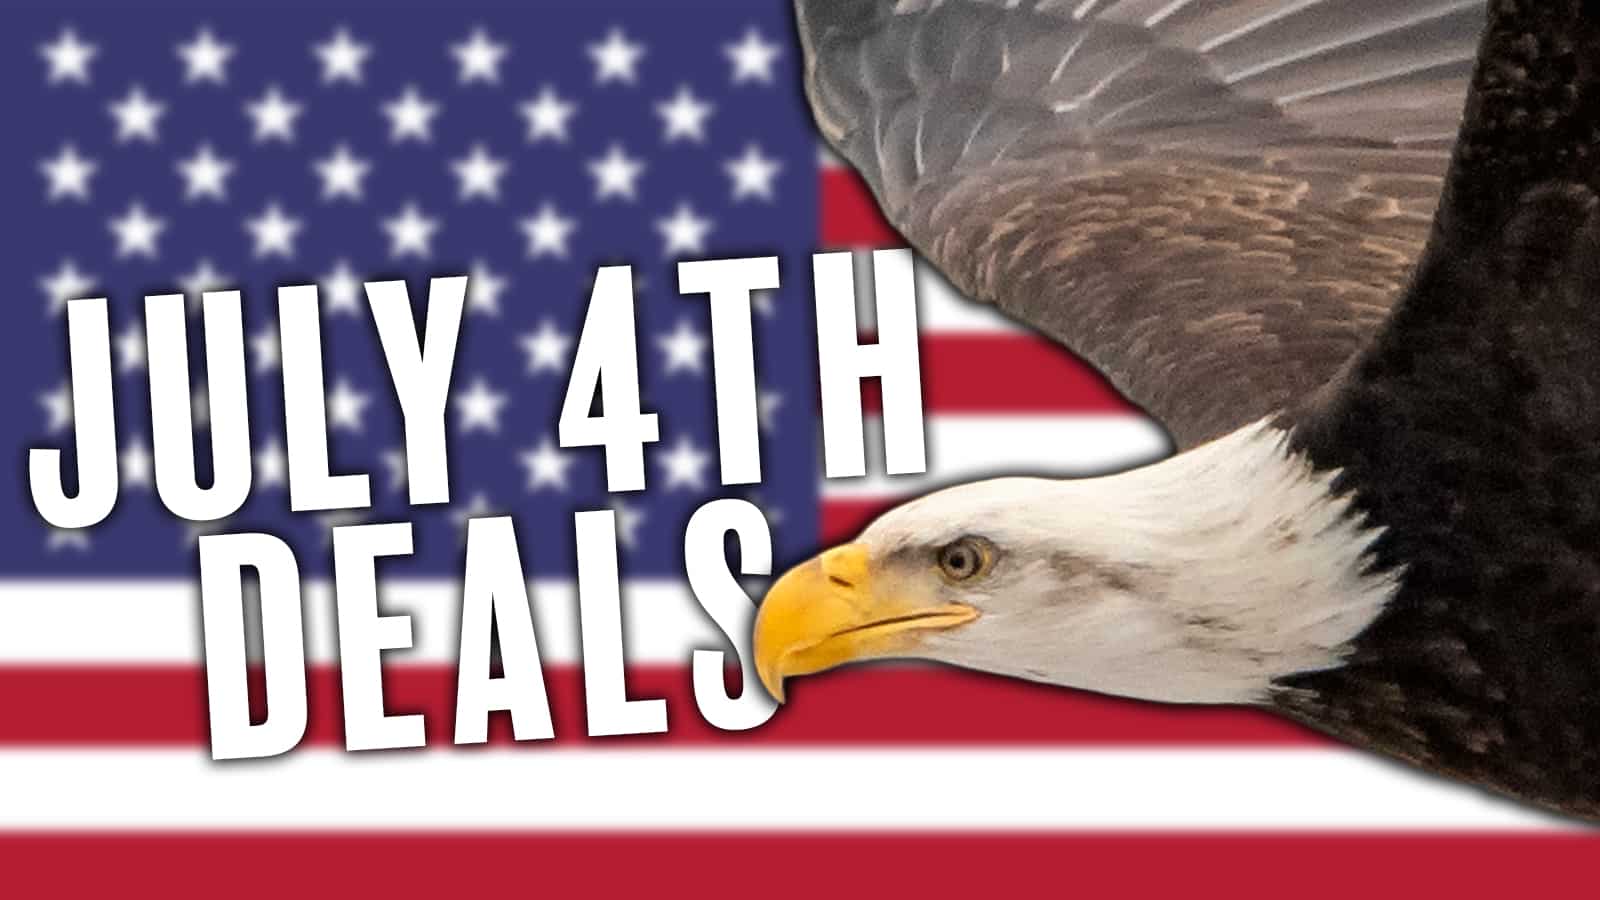 July 4th Deals with Eagle